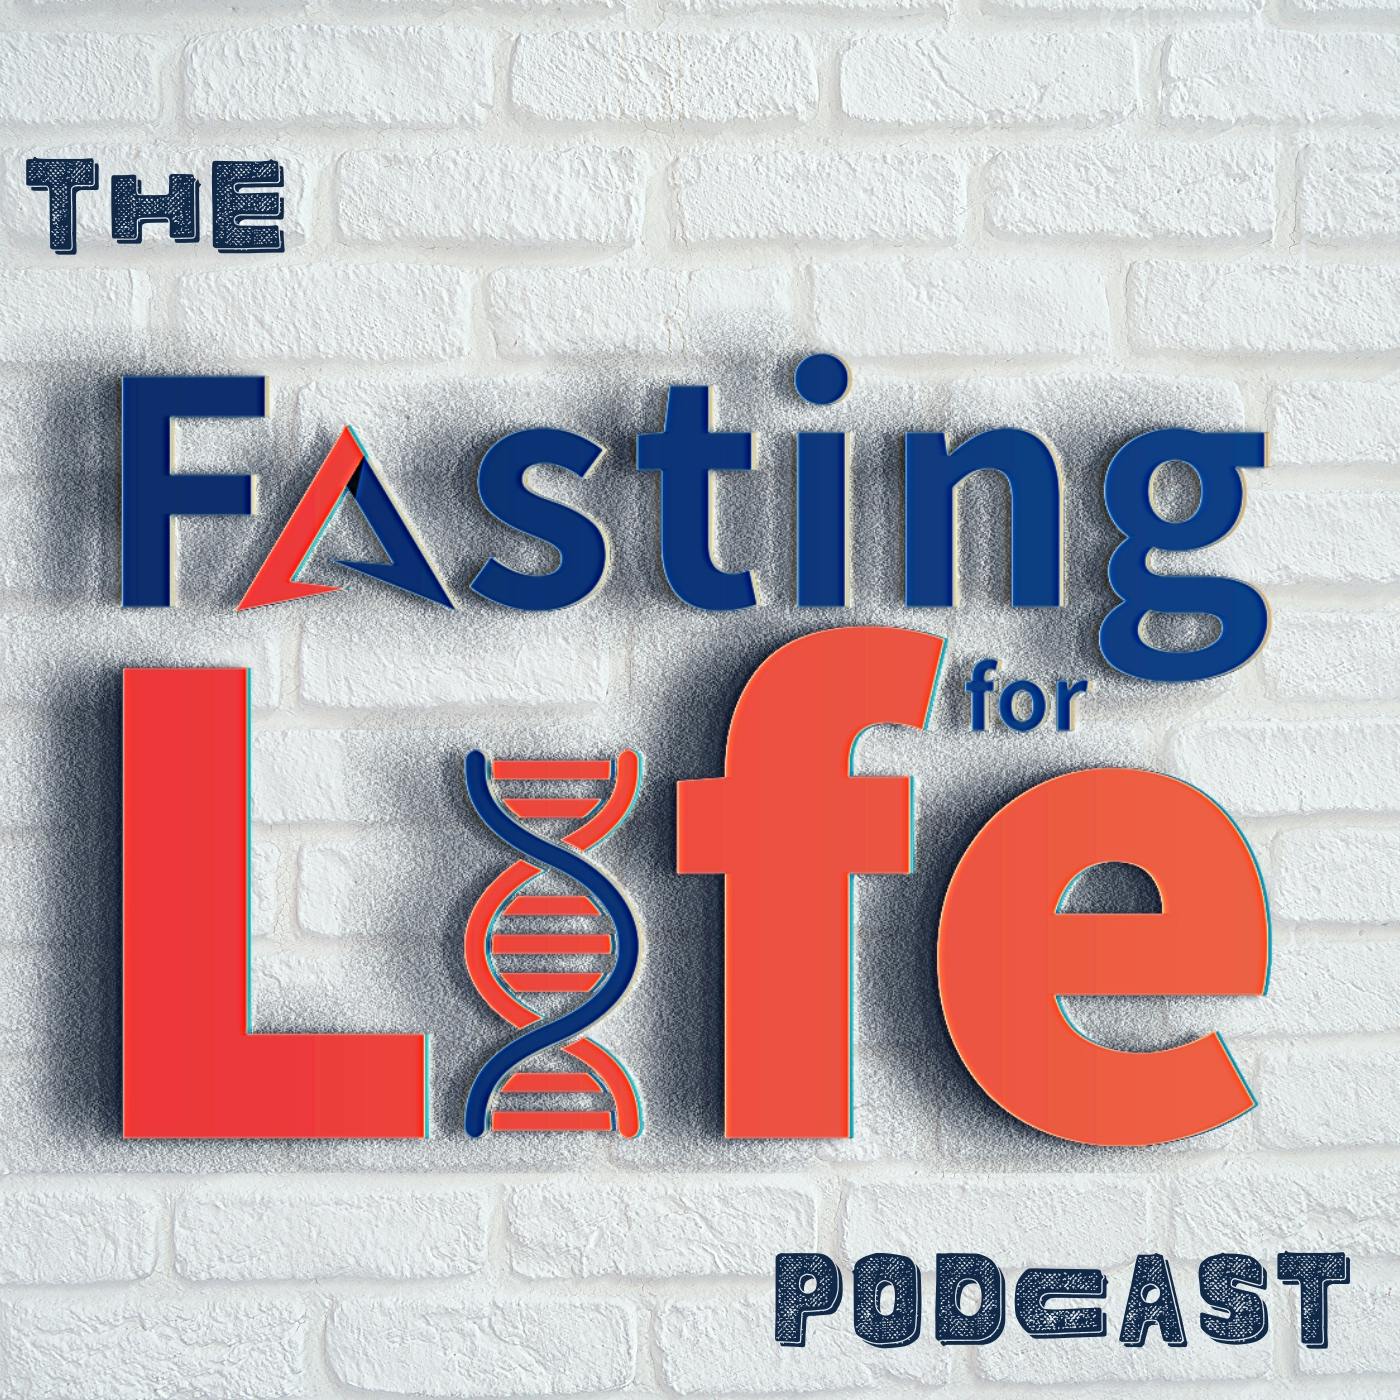 Ep. 155 - Fasting with or without low-carbohydrate Diet reduces Visceral fat and improves Metabolic Syndrome | Free Intermittent Fasting Plan for OMAD